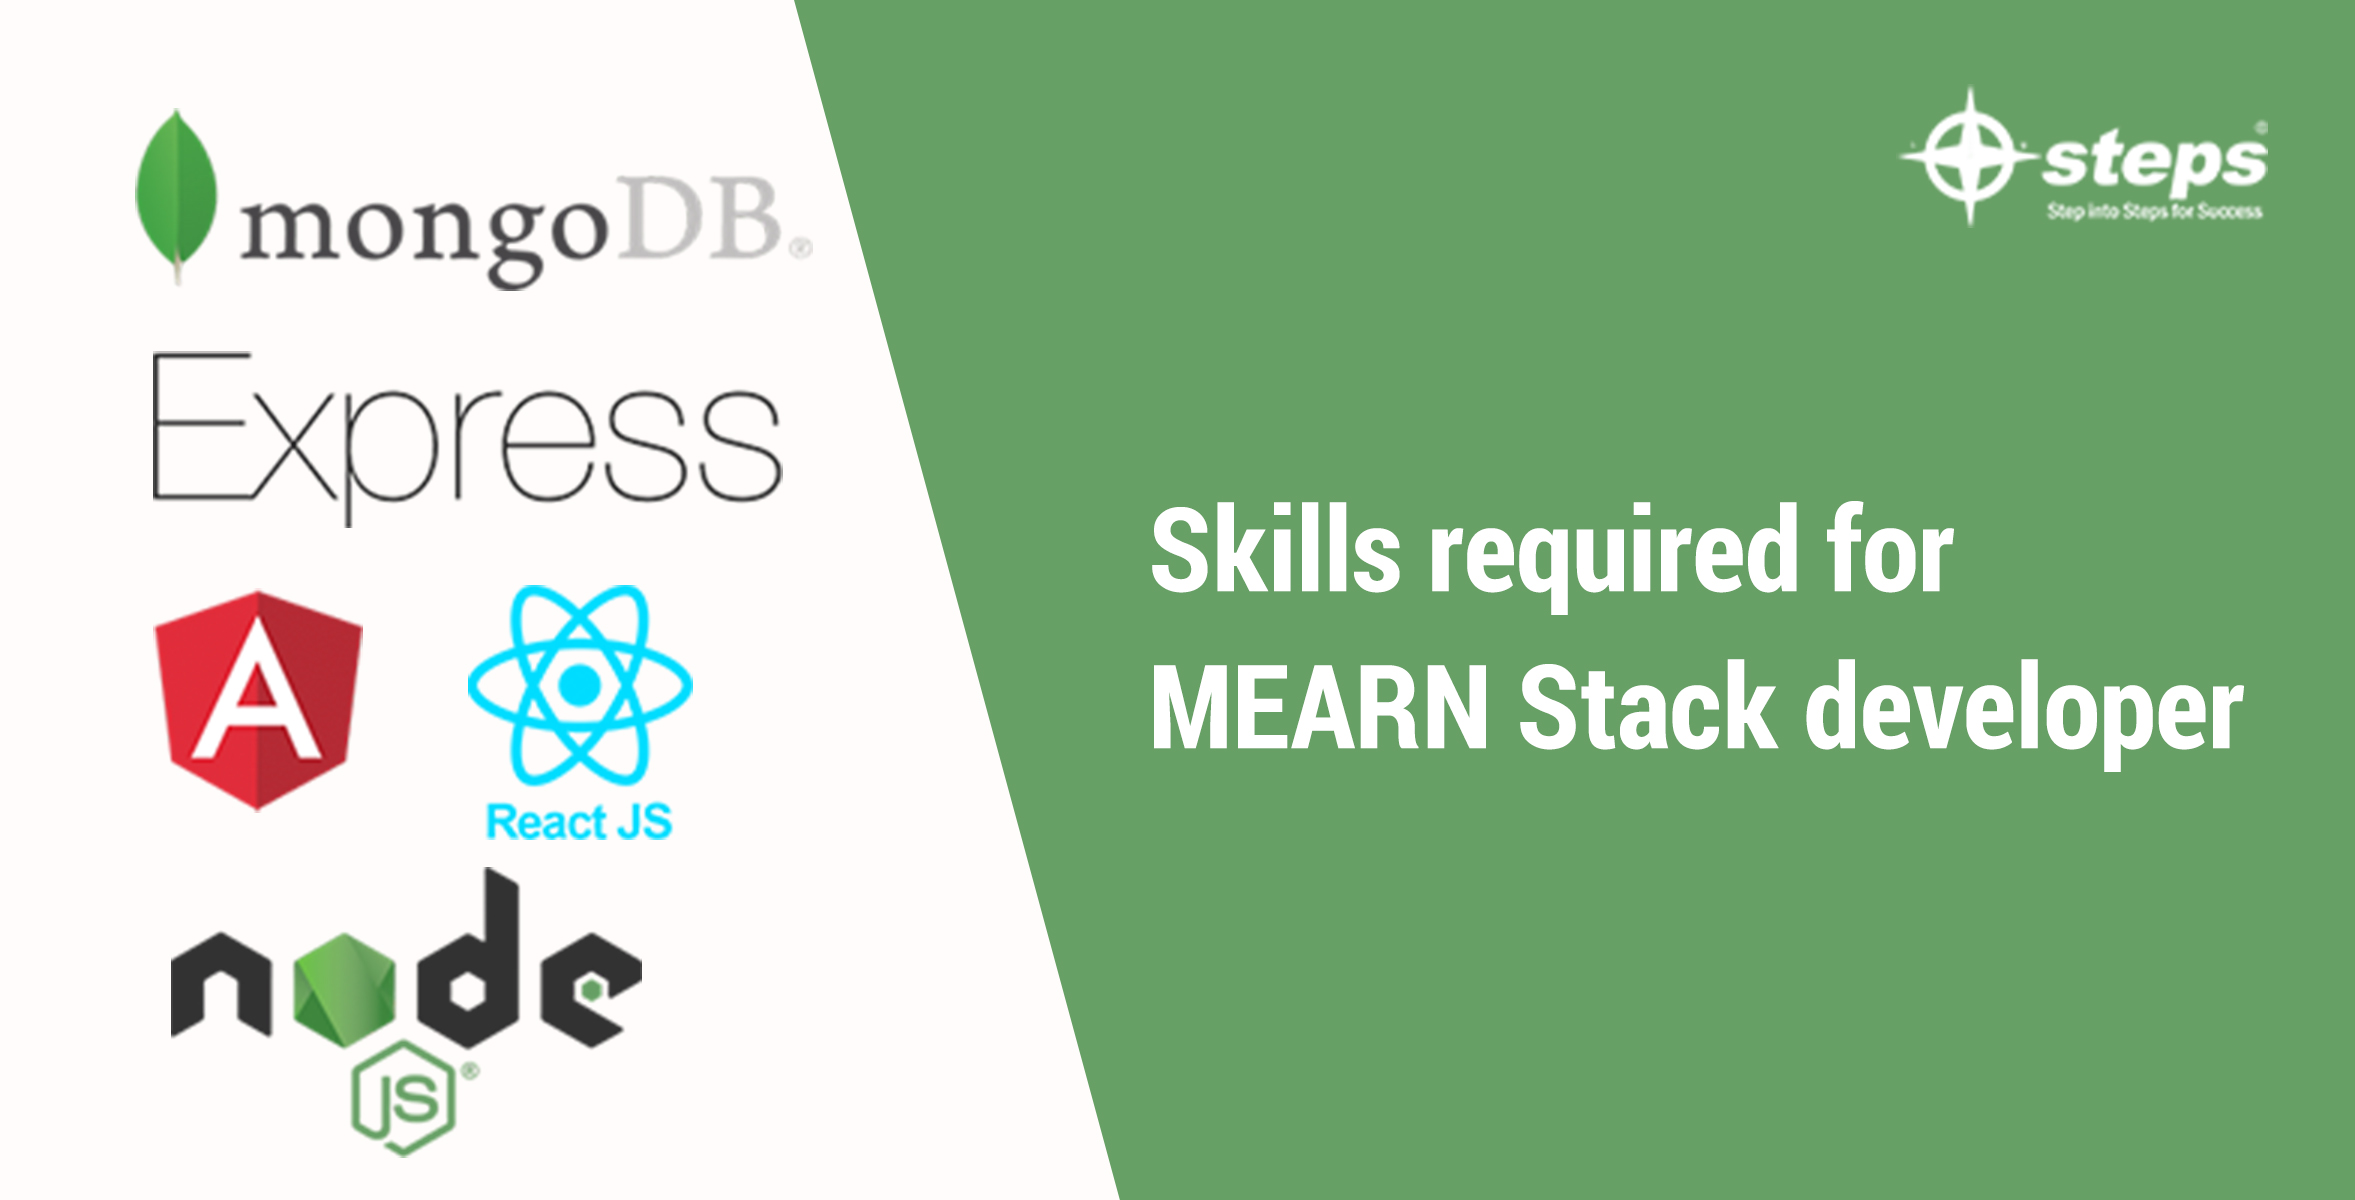 Skills required for MEARN stack developer